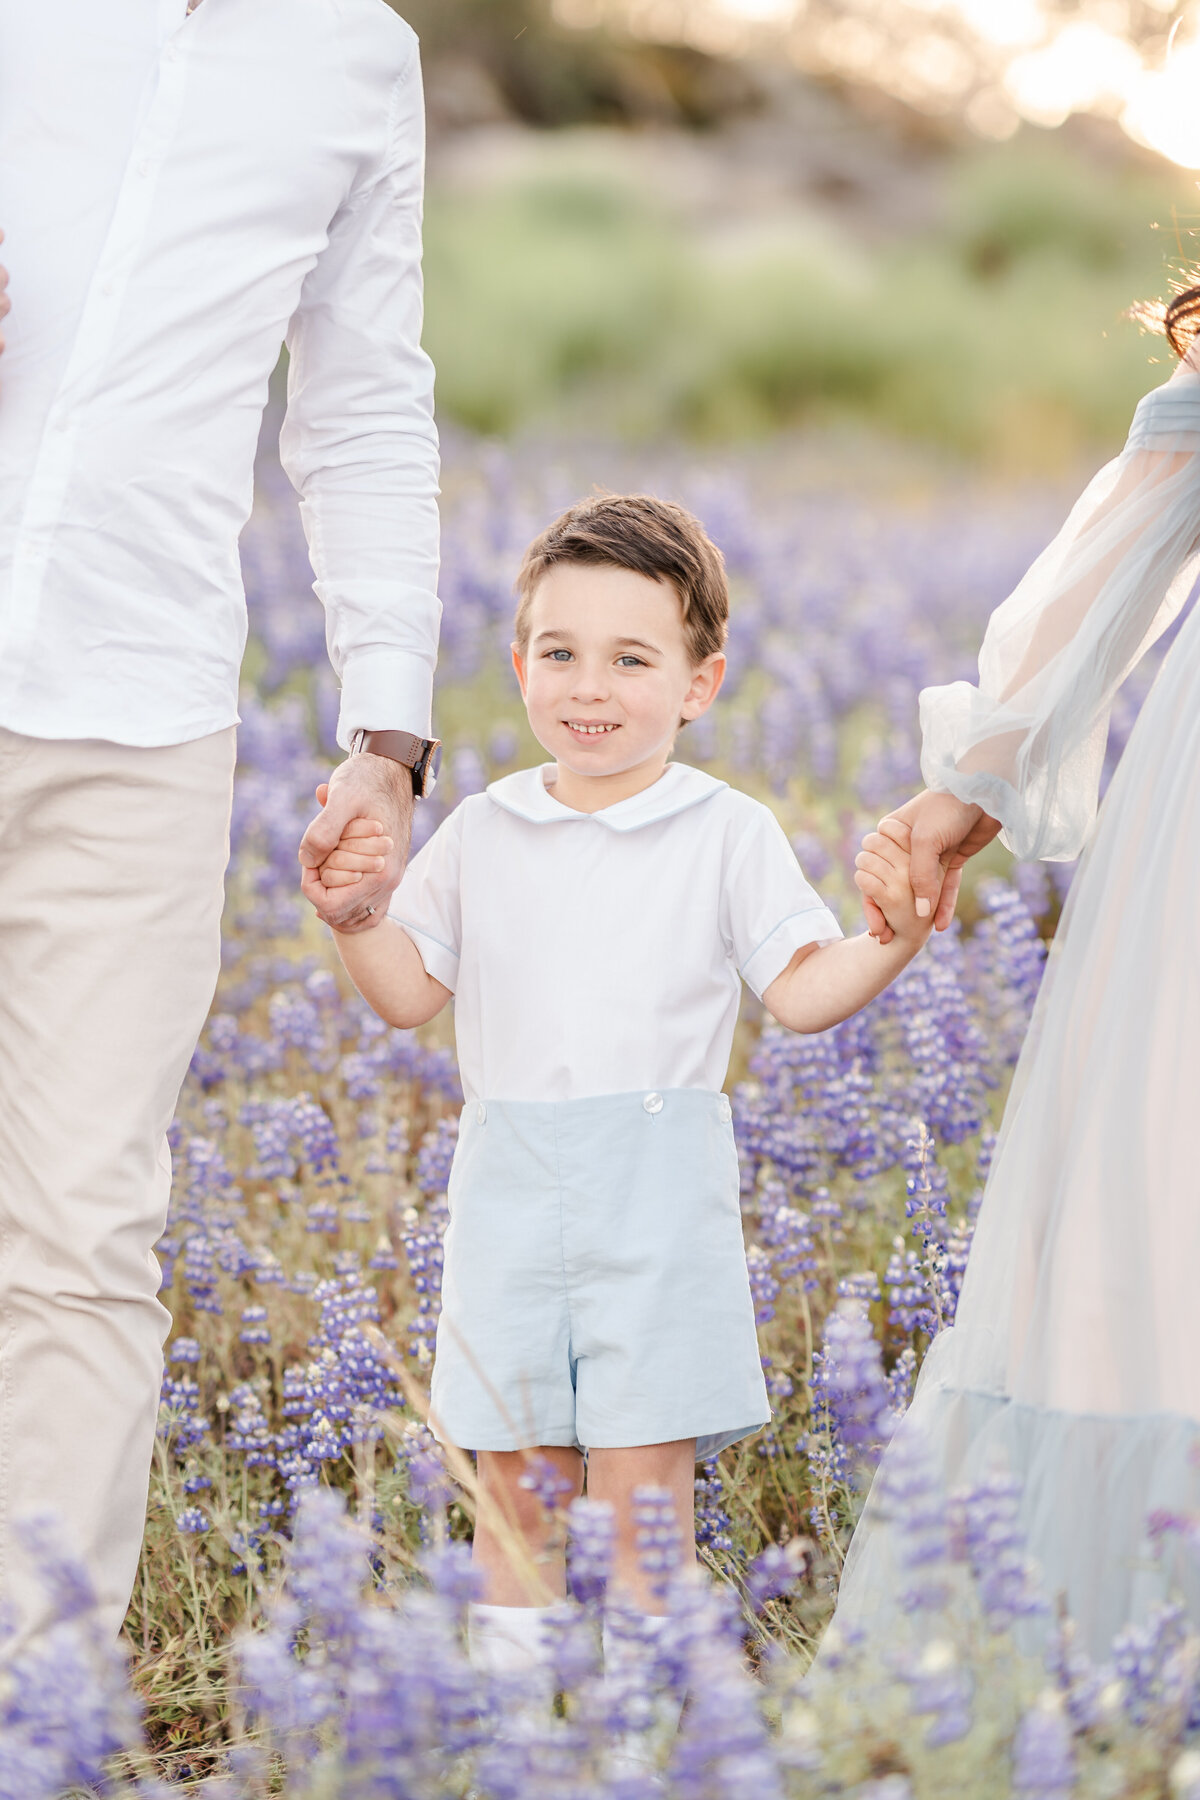 A young boy stands in a field of purple lupines holding his parents' hands while smiling photographed by bay area photographer, Light Livin Photography.